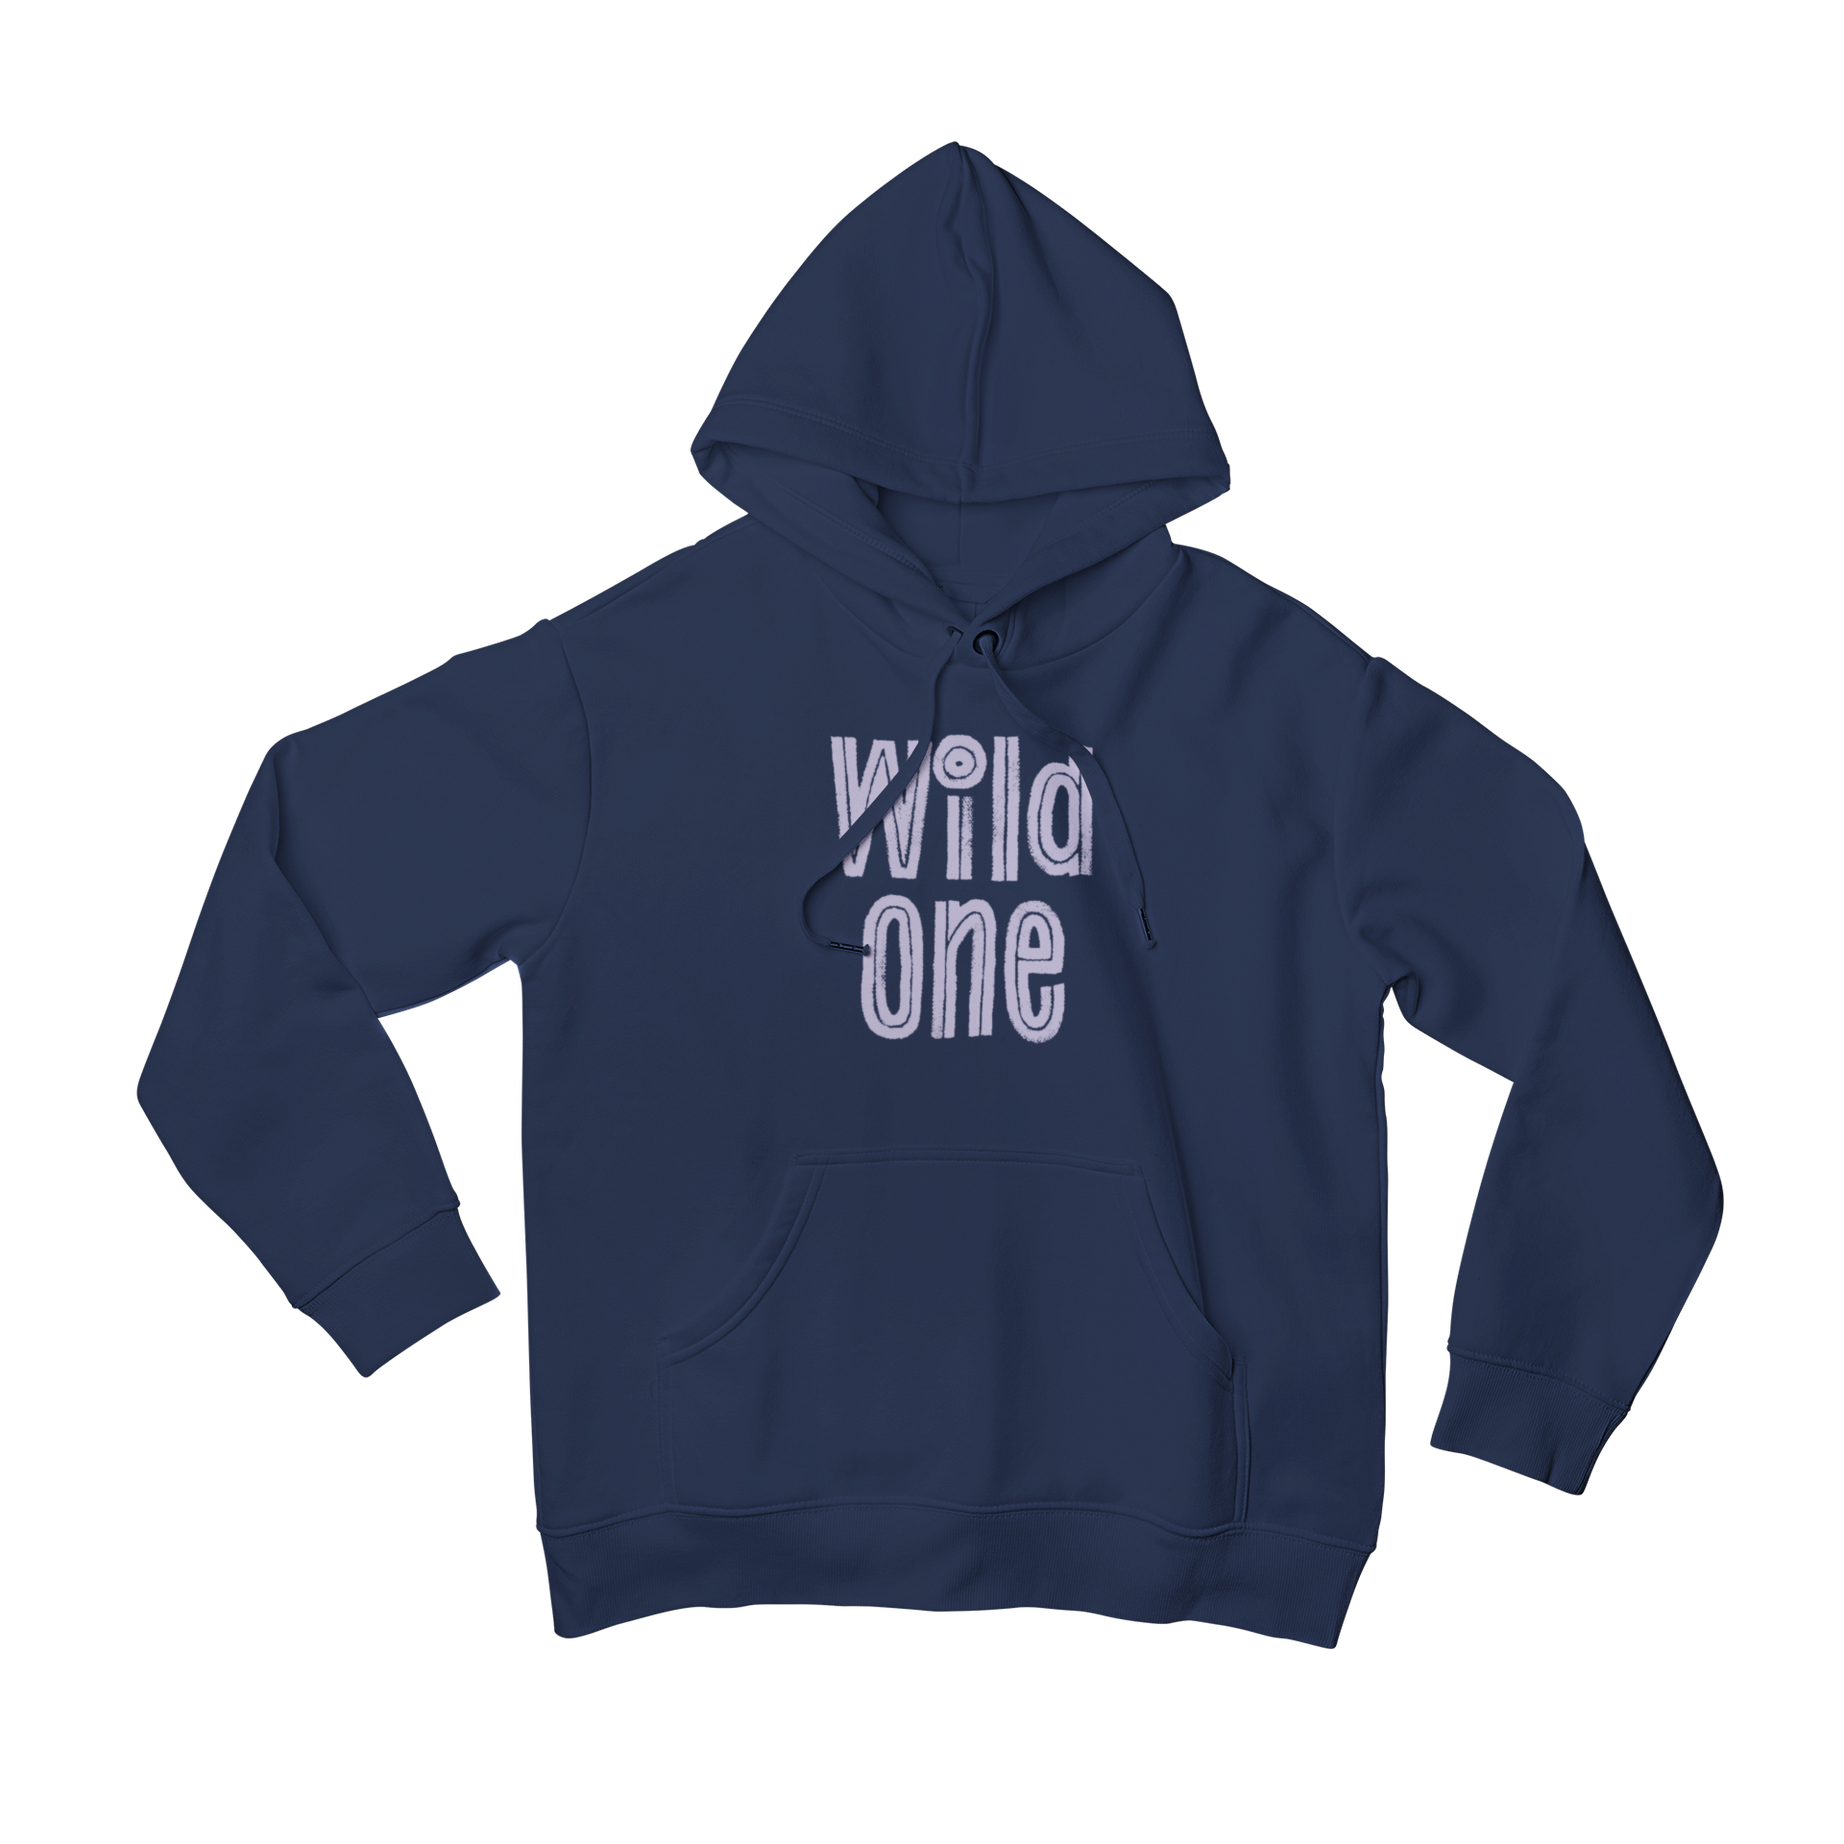 The Wild One hoodie features a matching 'wild one' slogan, perfectly complementing our mild one hoodie. With both pieces, you'll stand out as a fashion-forward and bold individual. Embrace your wild side with this stylish and unique hoodie.